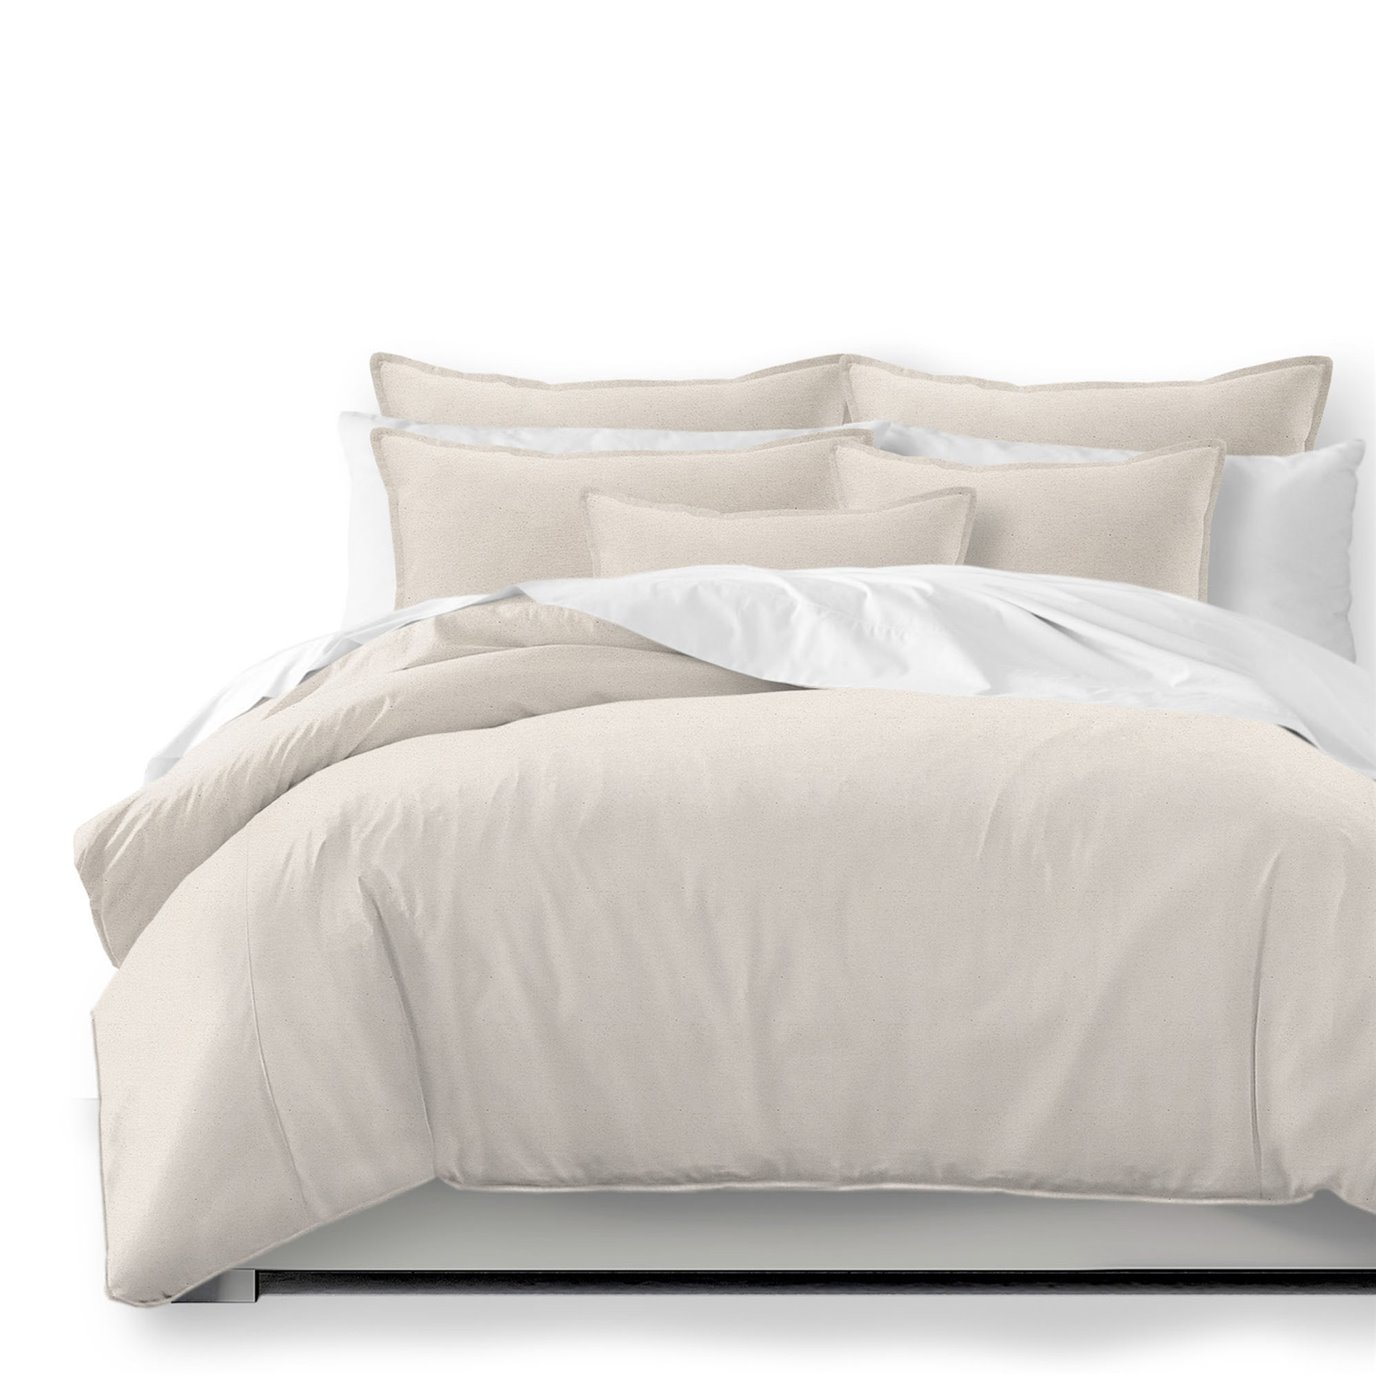 Braxton Natural Comforter and Pillow Sham(s) Set - Size Twin